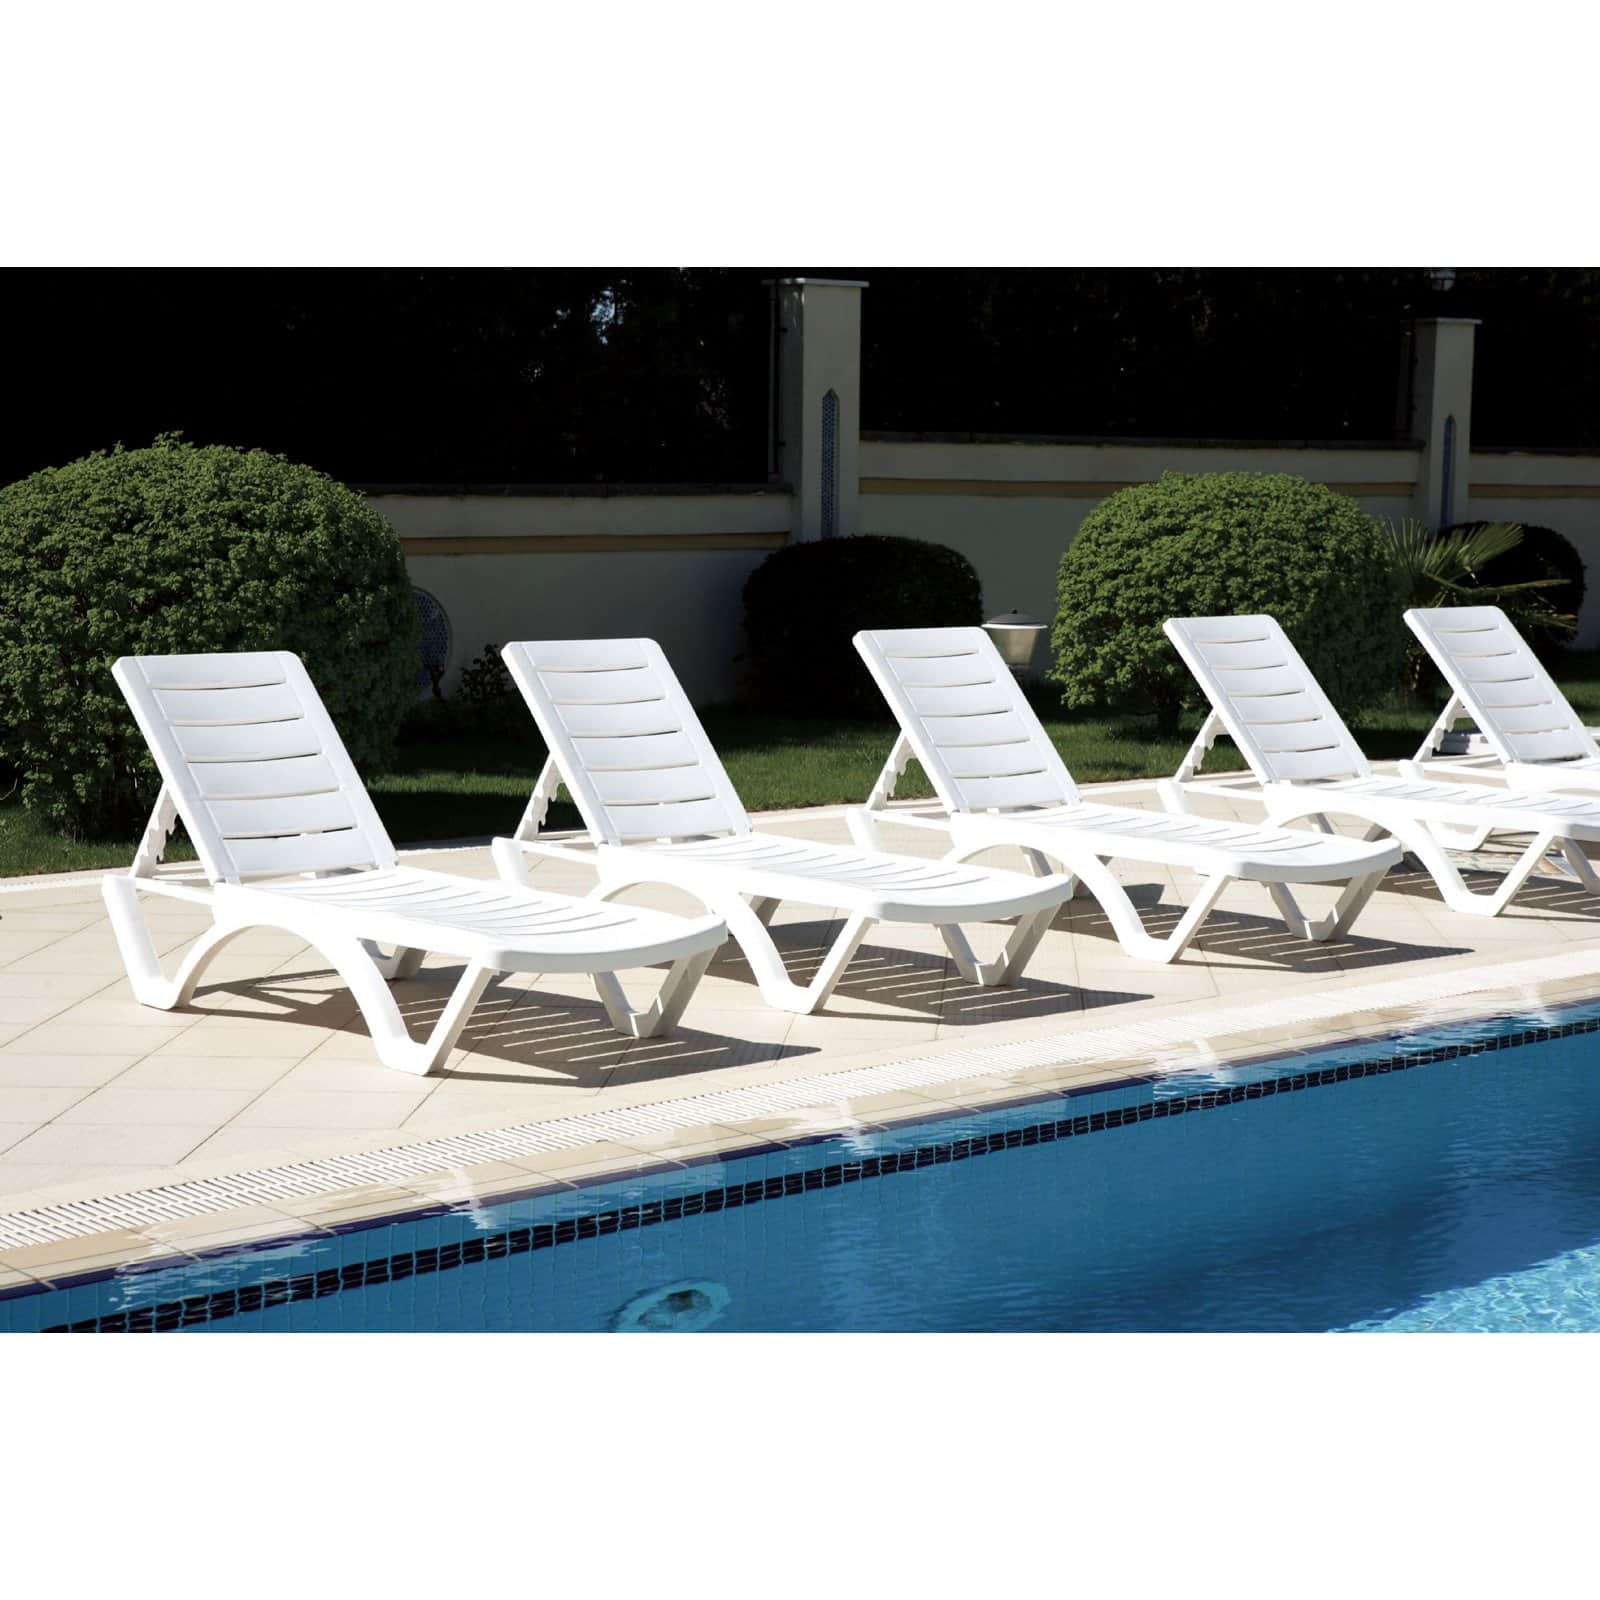 Compamia Aqua Modern Resin Pool Chaise Lounge in White Finish - image 4 of 9